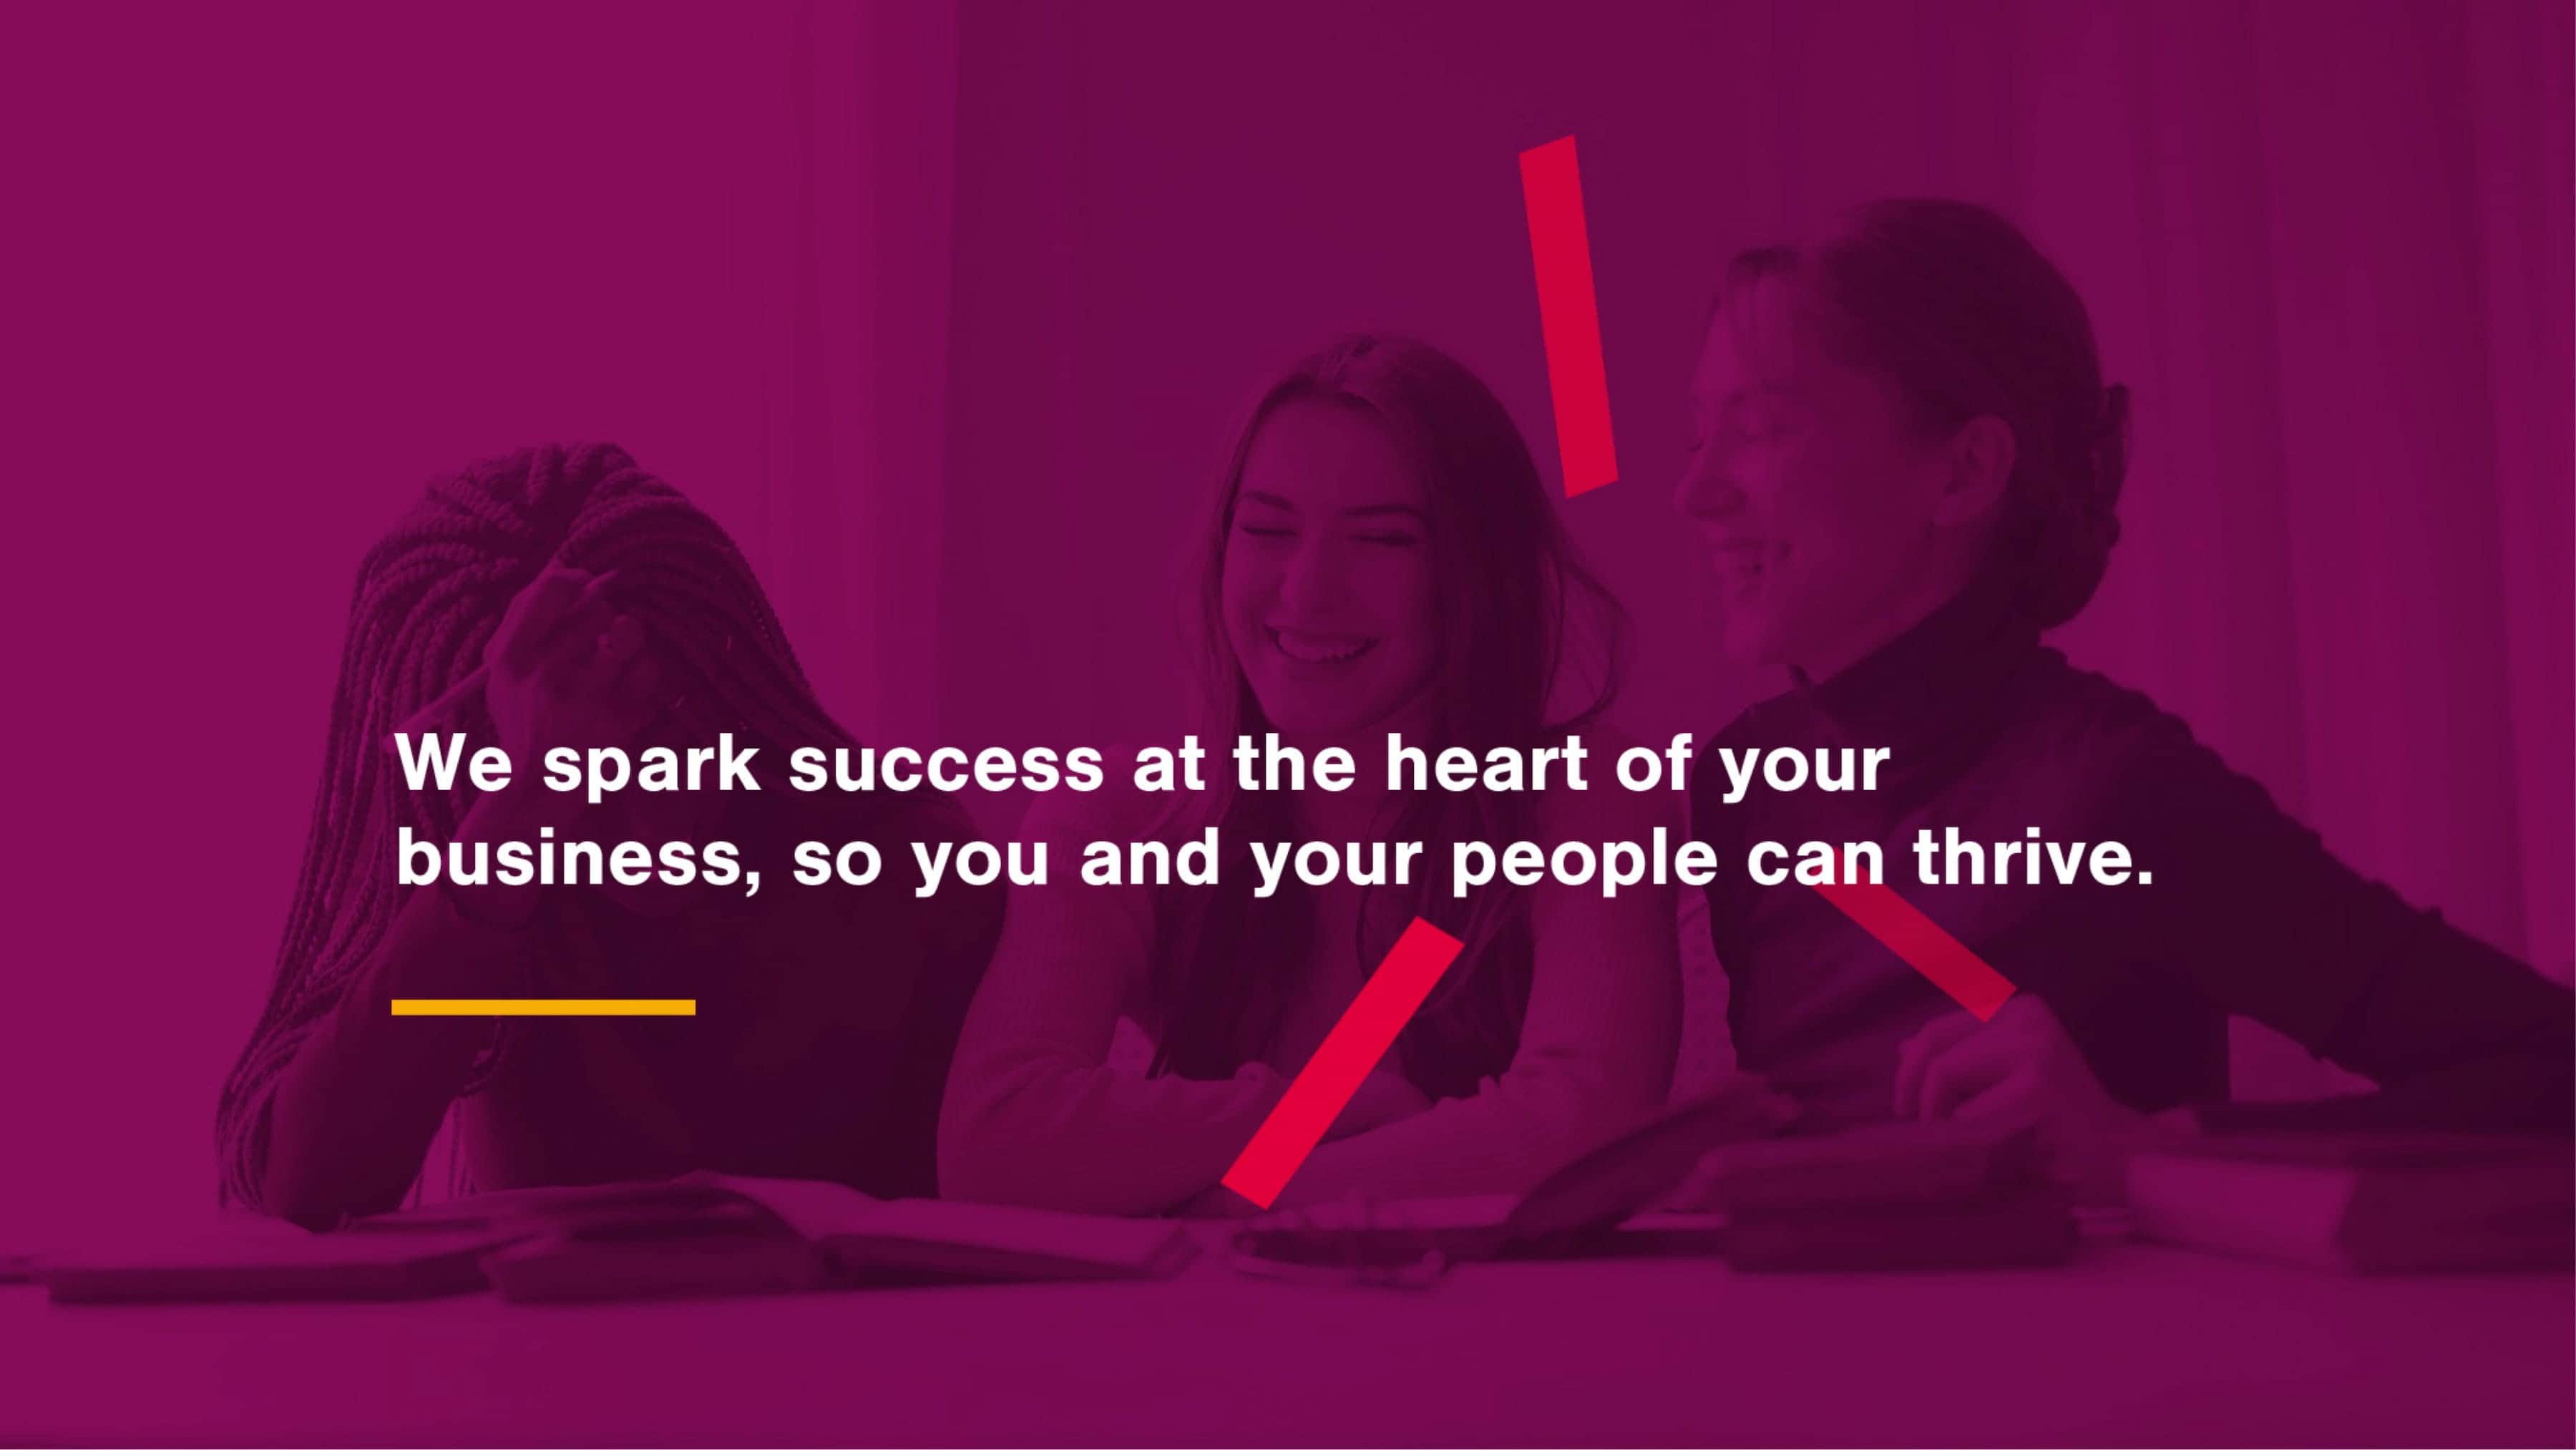 We spark success at the heart of your business, so you and your people can thrive